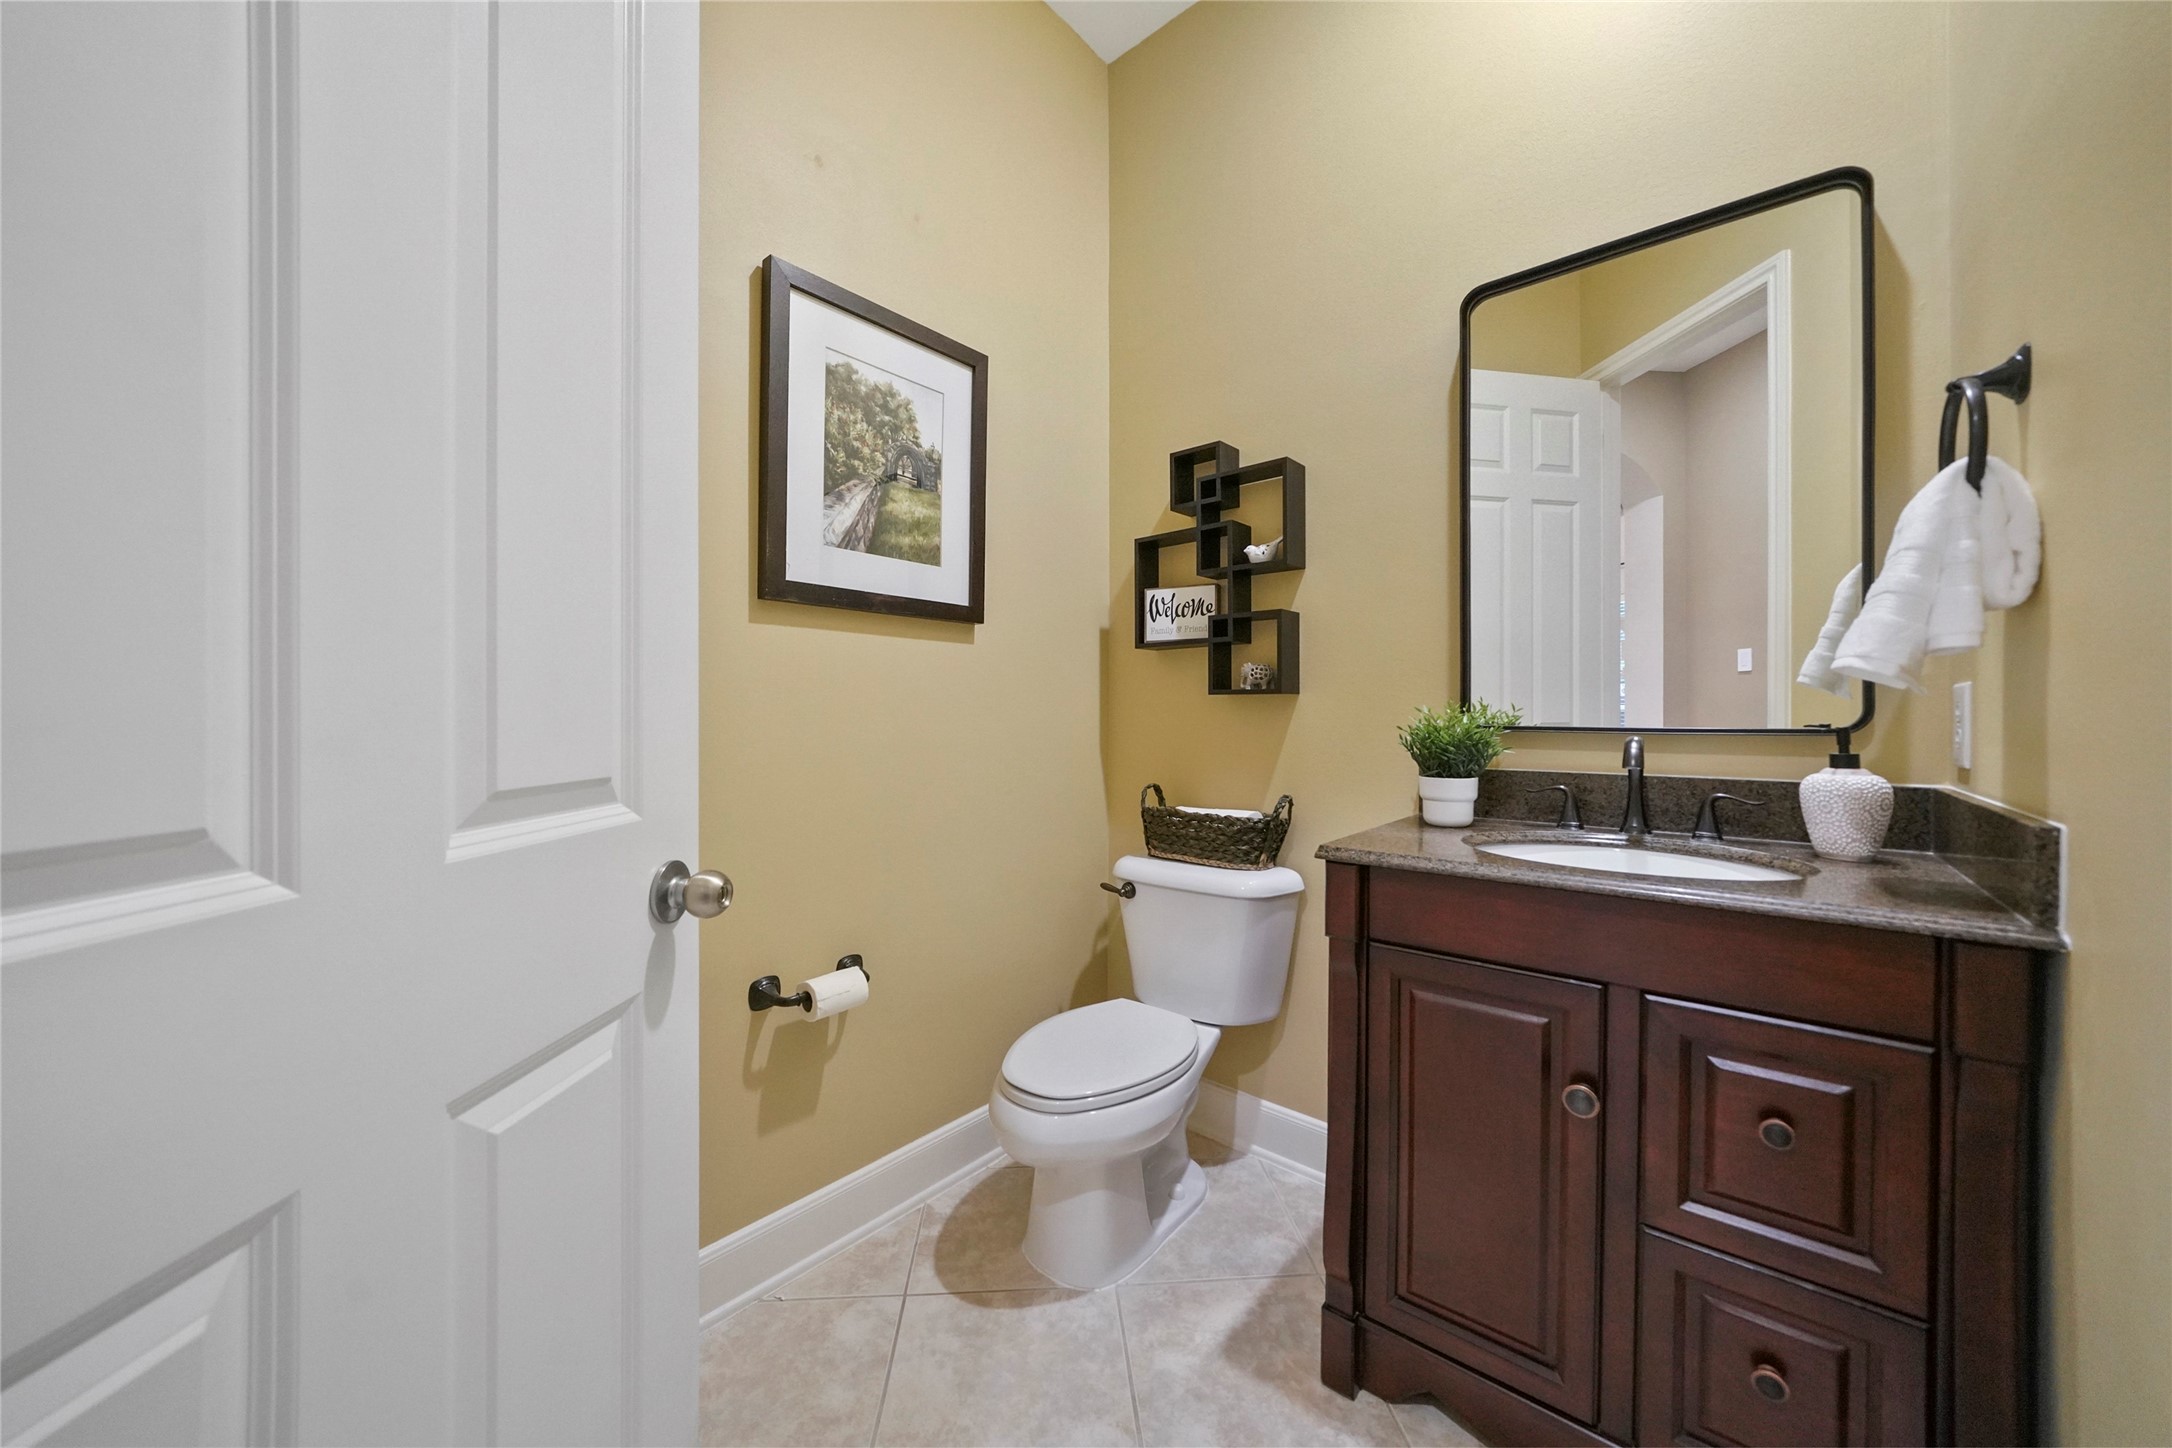 The powder room is a cheerful space where guests can freshen up.